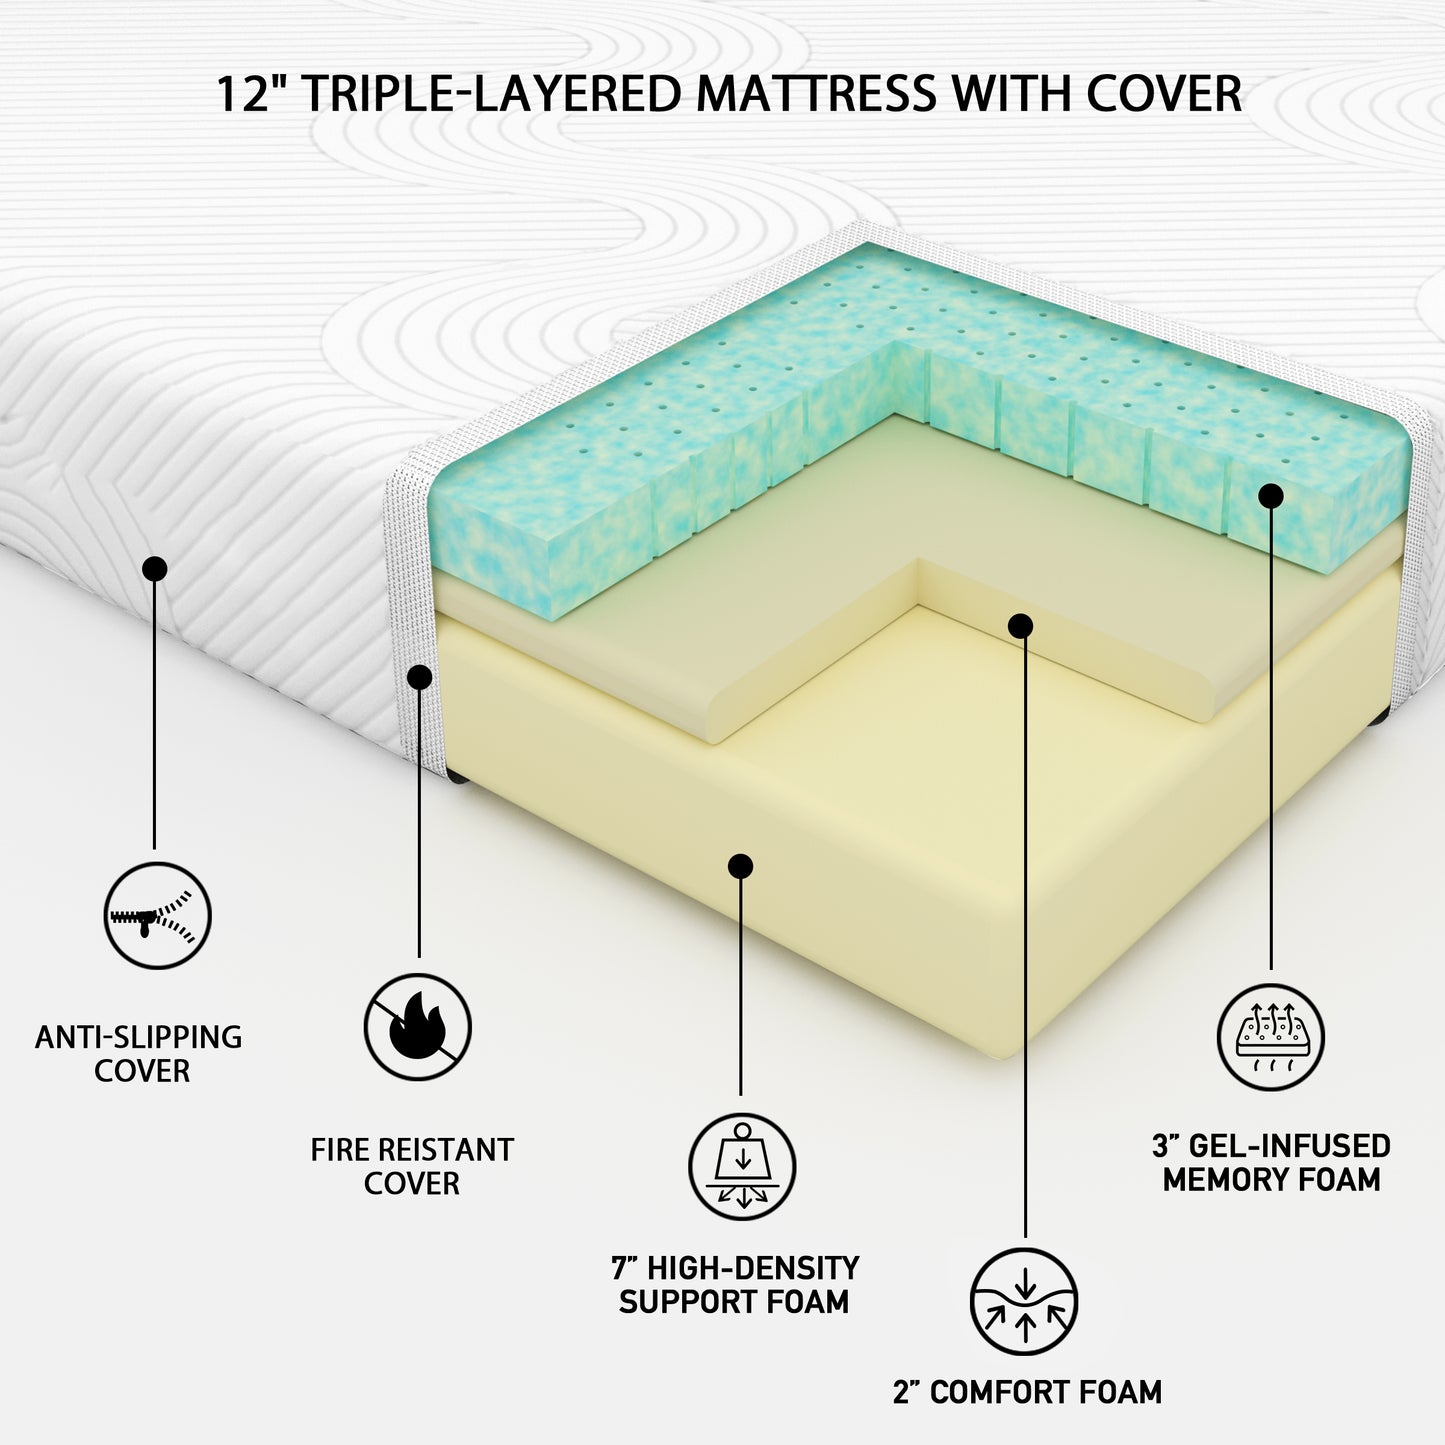 Contour Lux Mattress 6" KIds or Young Adults